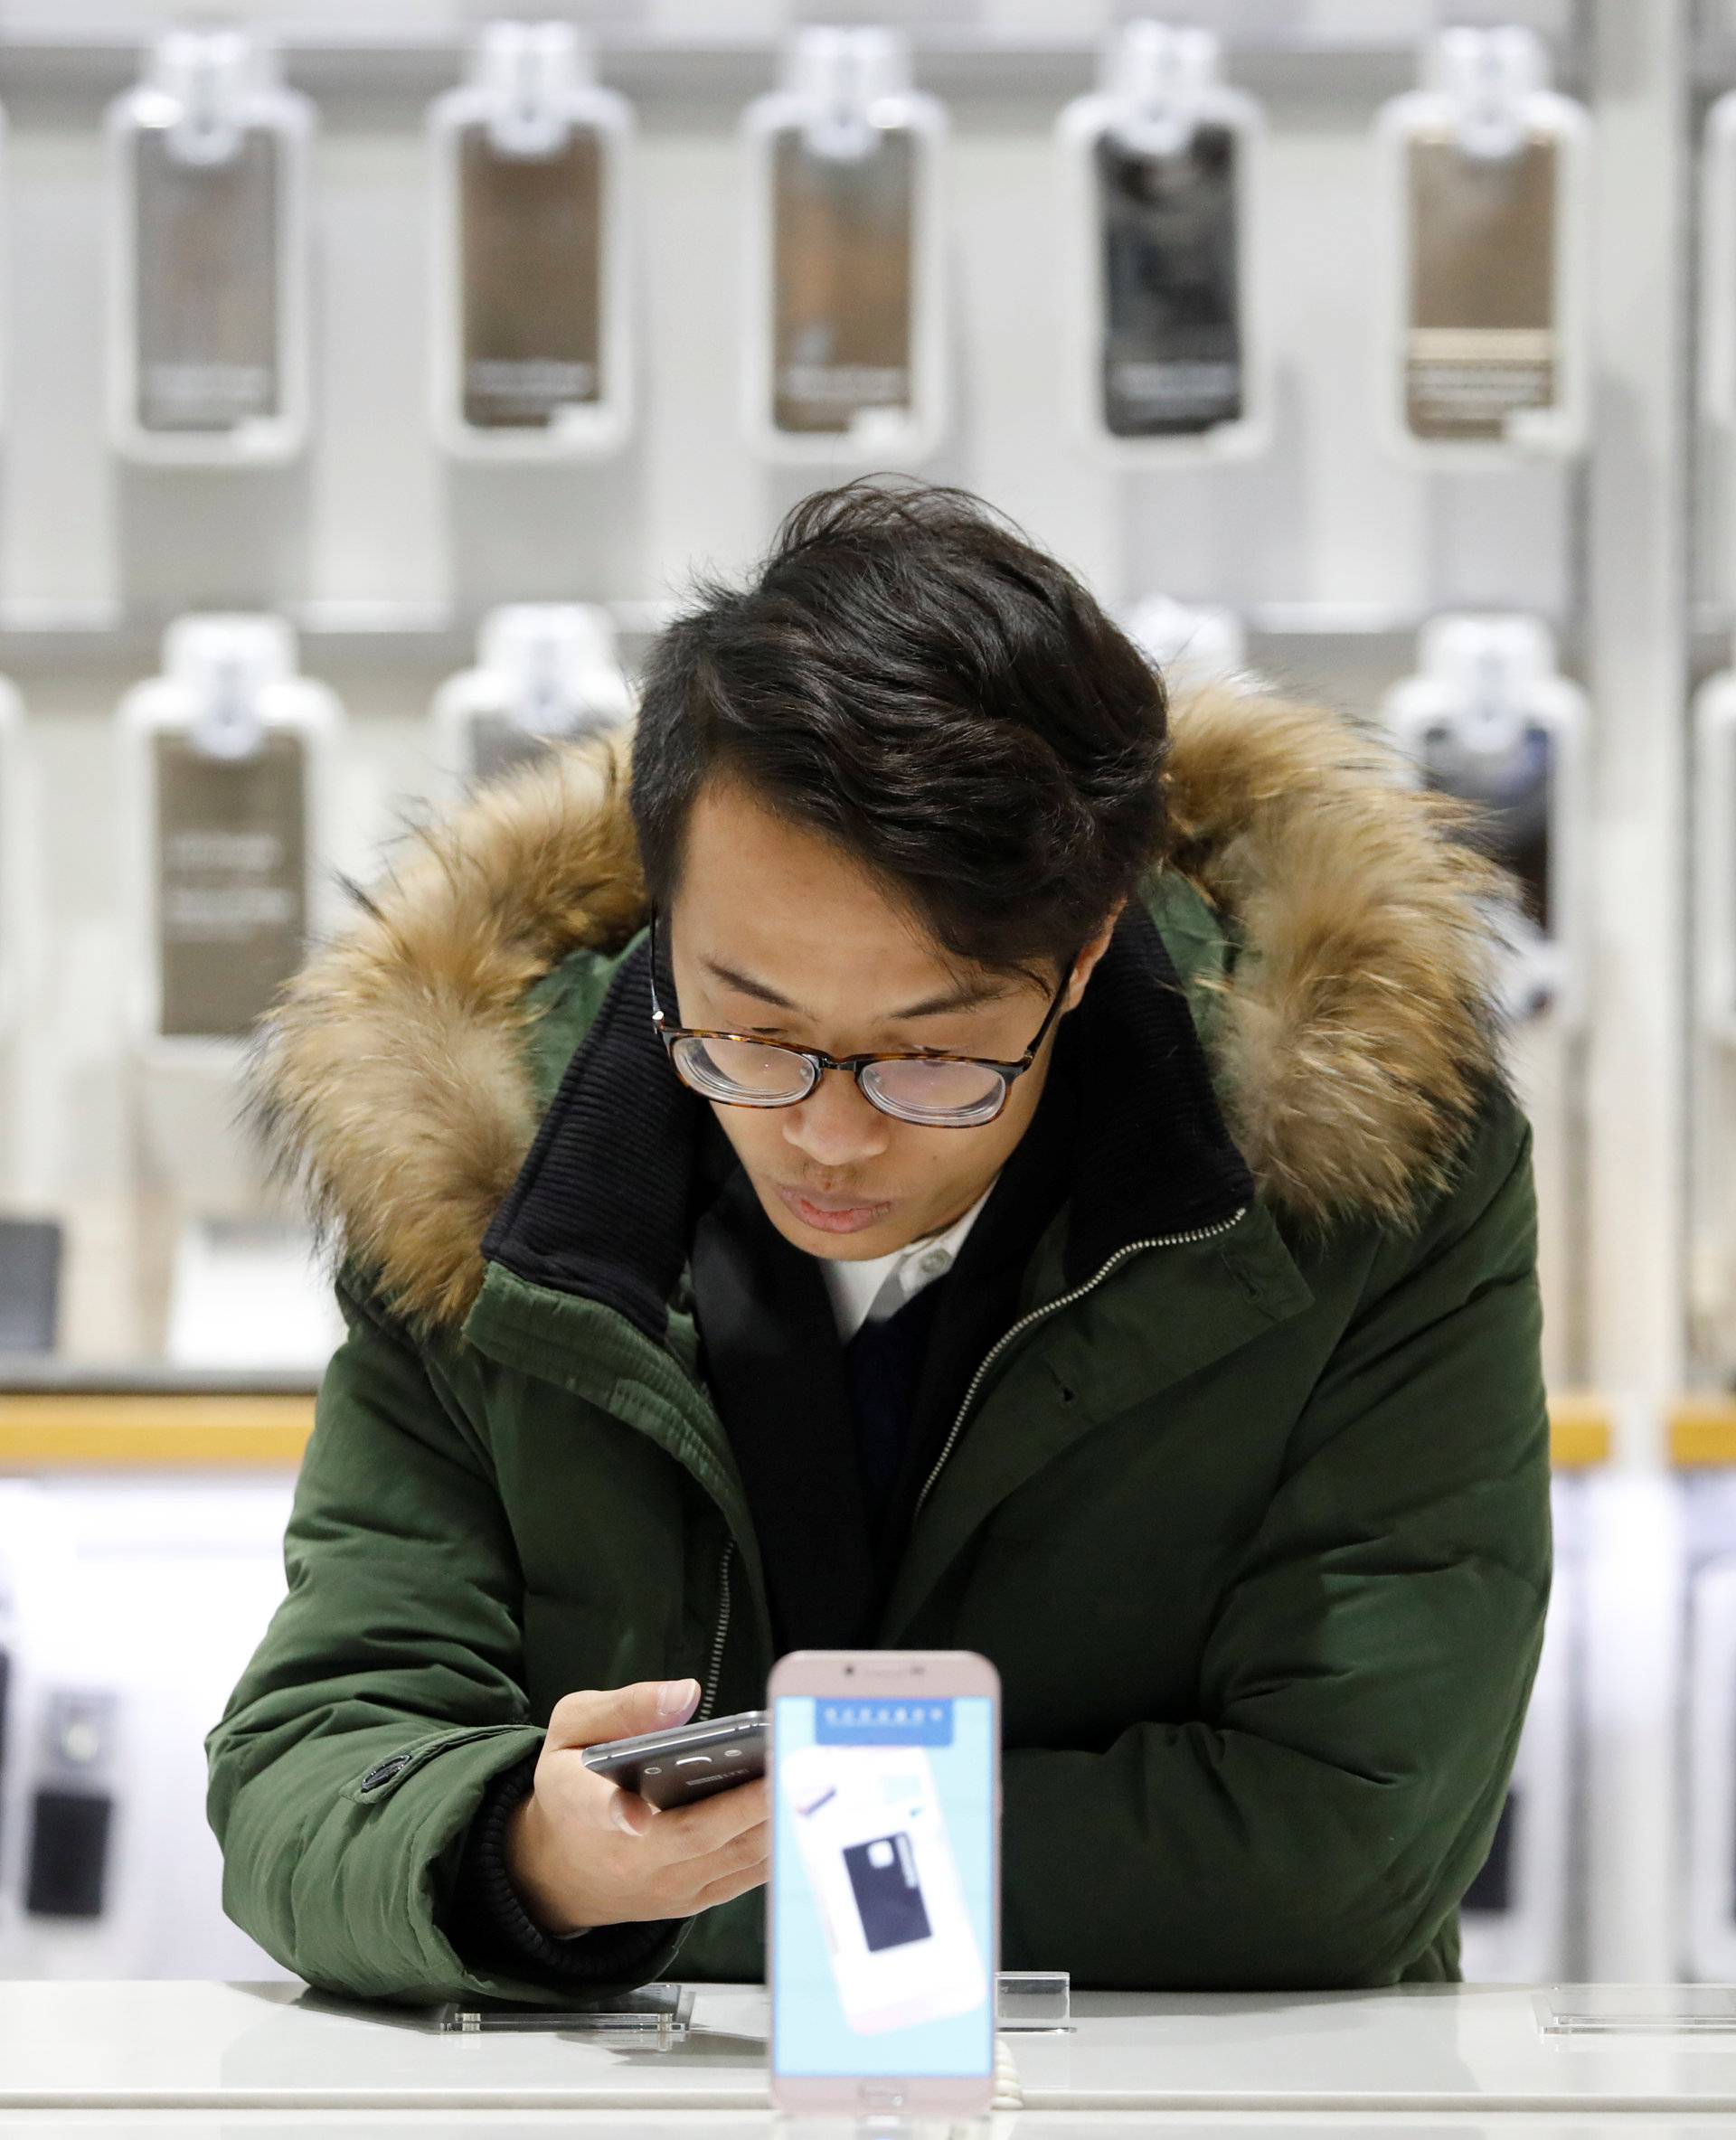 A man tries out a Samsung Electronics' smartphone at its store in Seoul